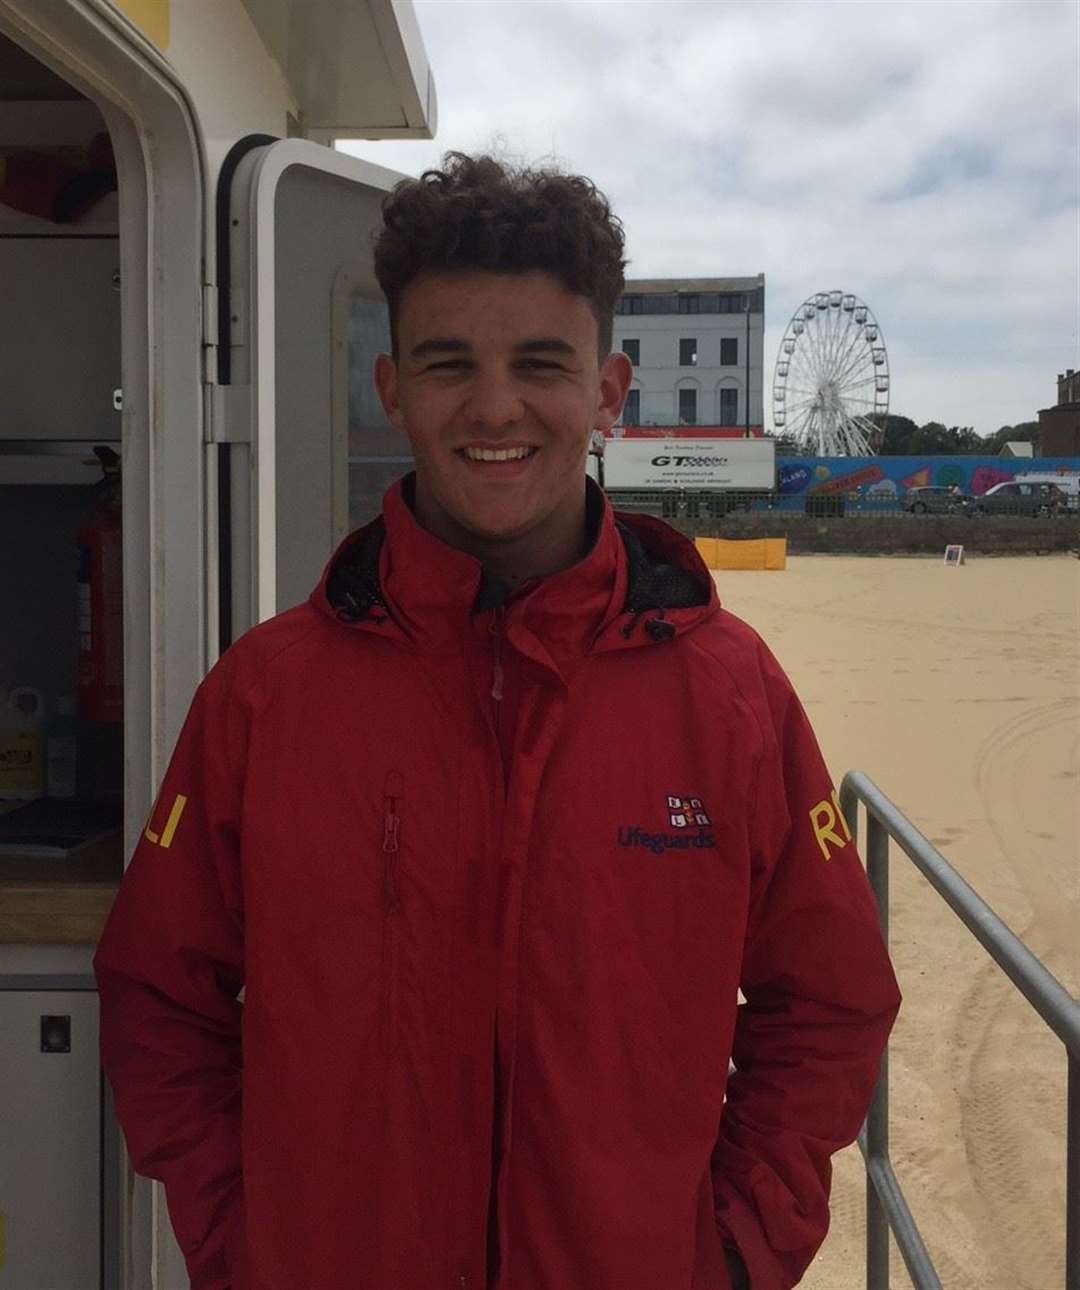 Thanet lifeguard Taine, who rescued a swimmer and surfer who got into trouble